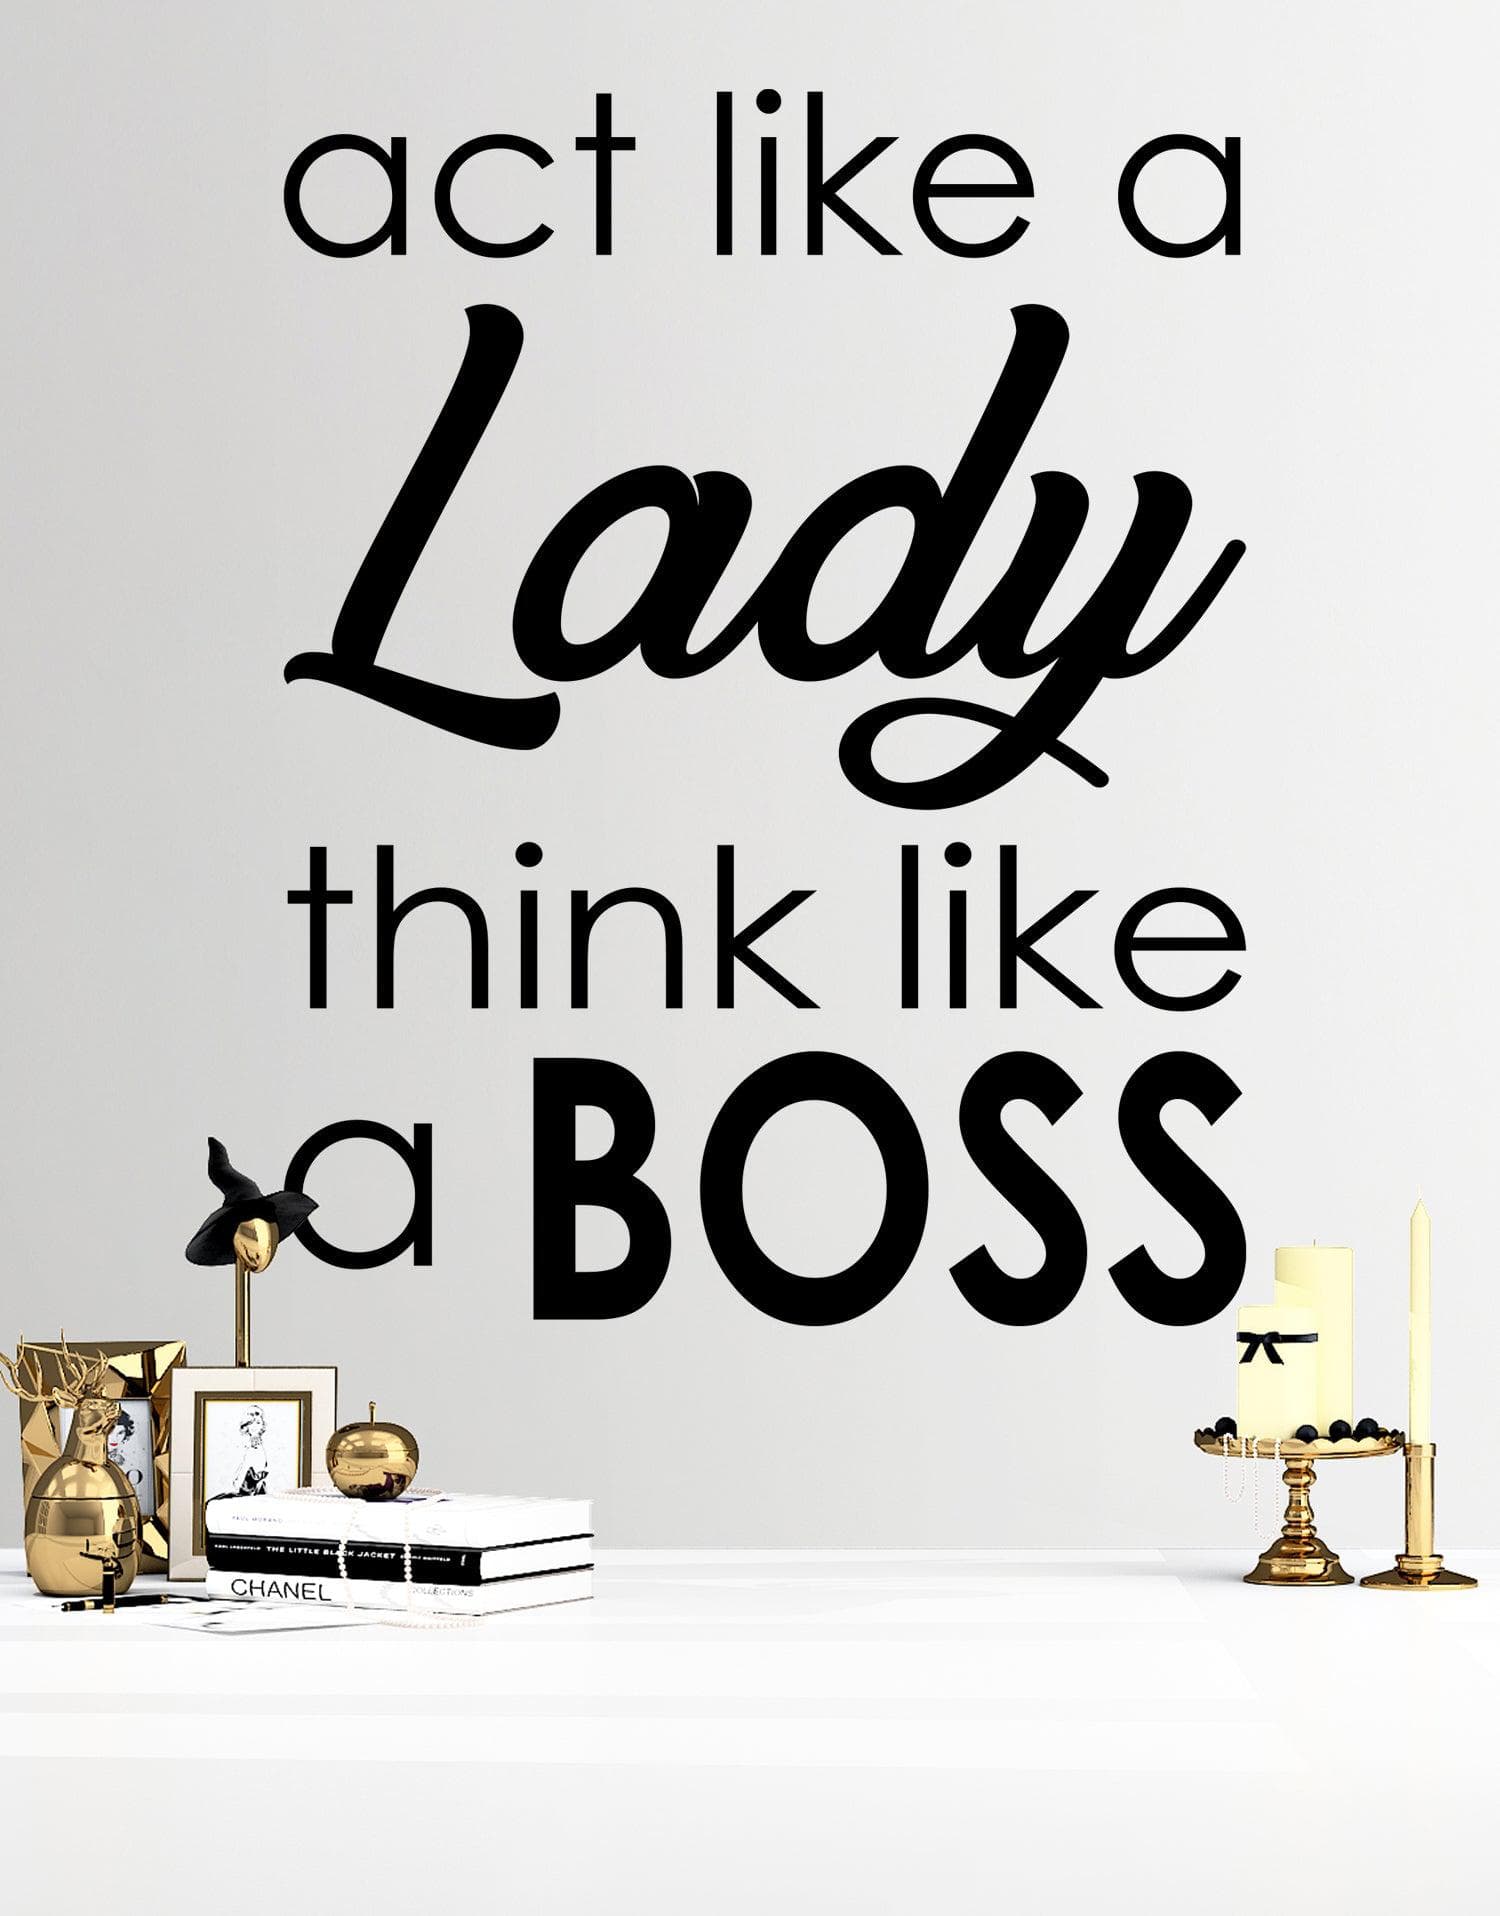 like a boss quotes